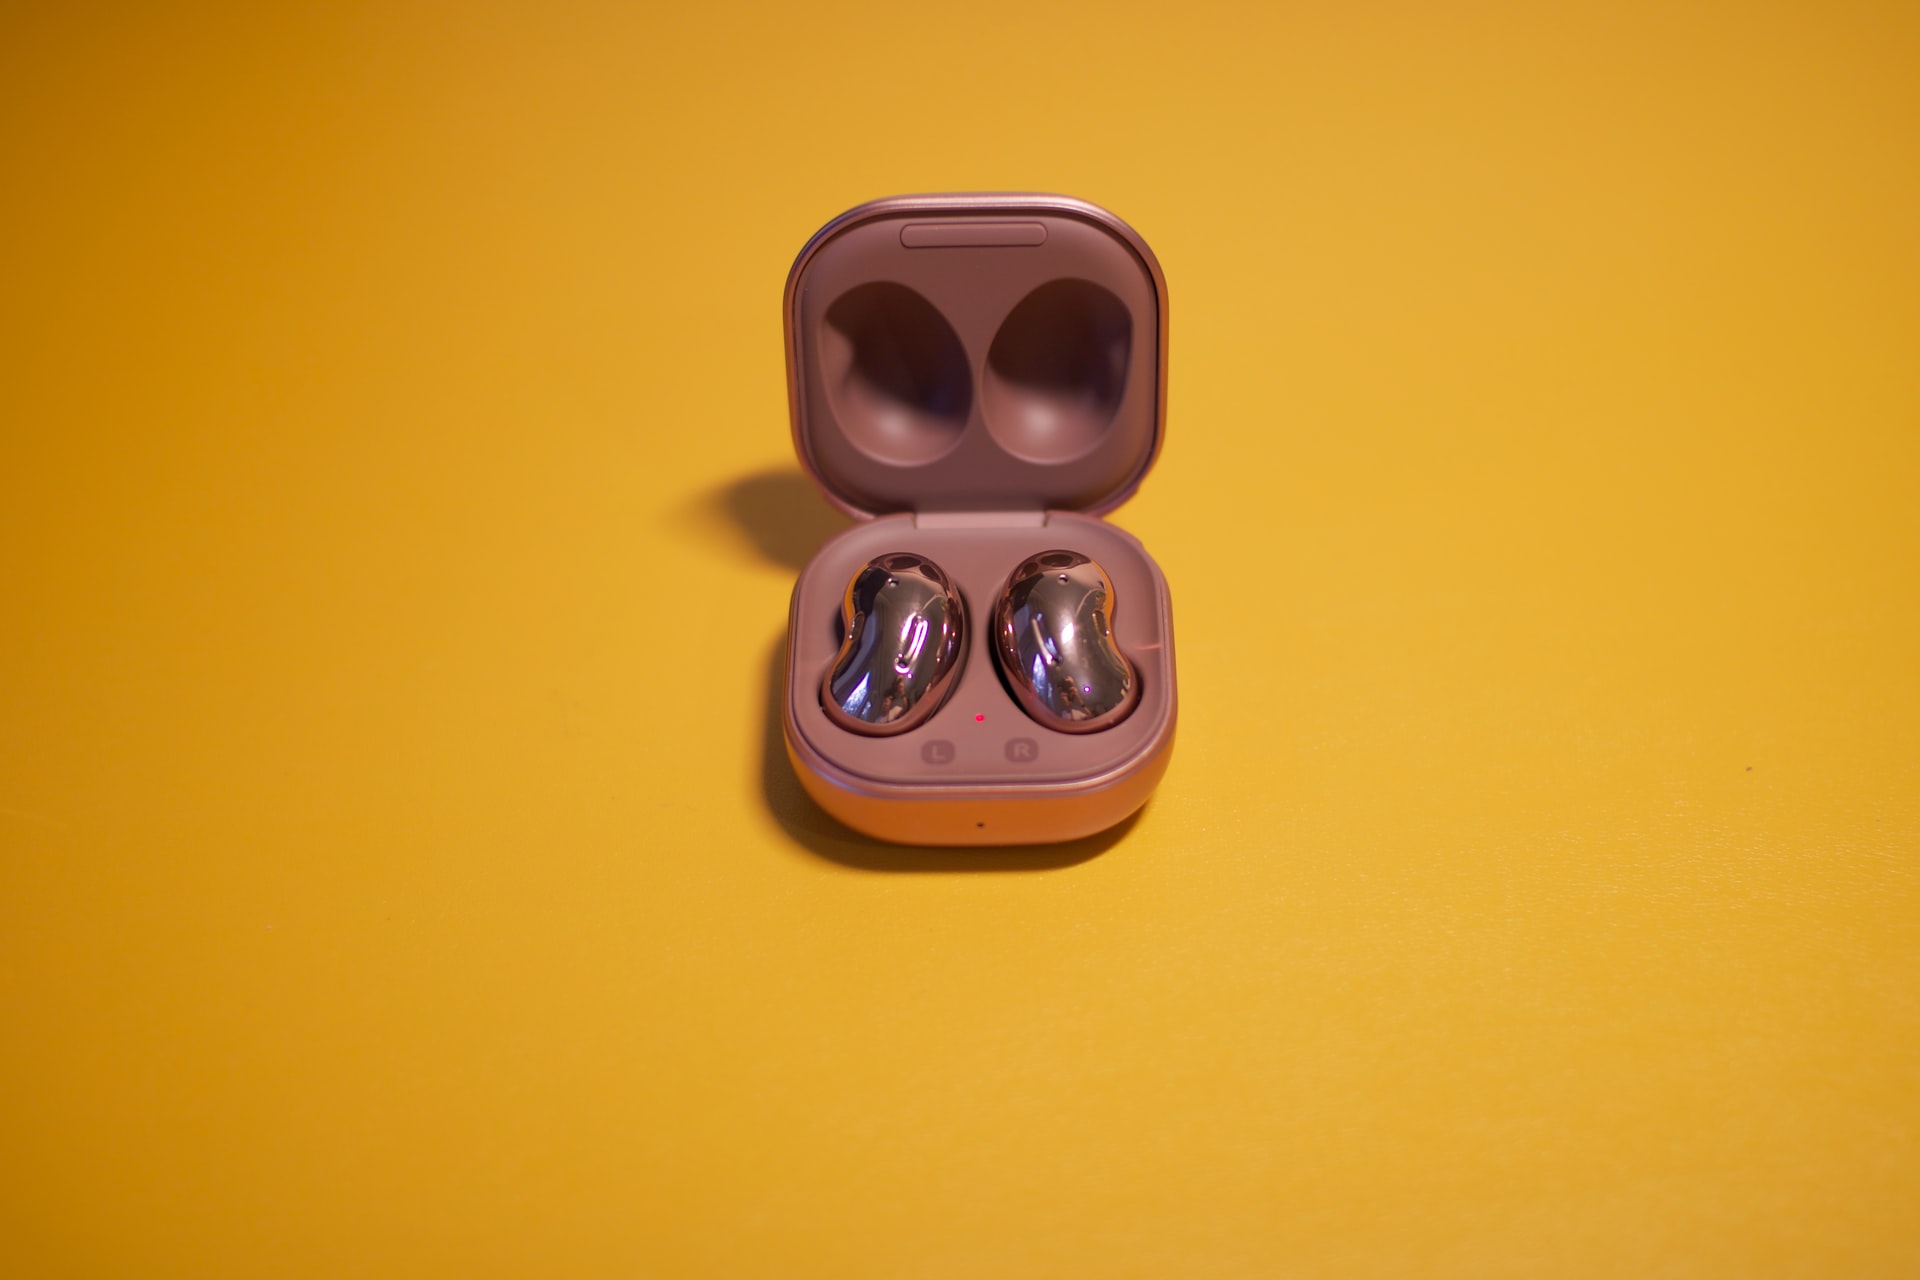 Samsung announced a new set of Galaxy Buds Pro to take on Apple’s AirPods Pro